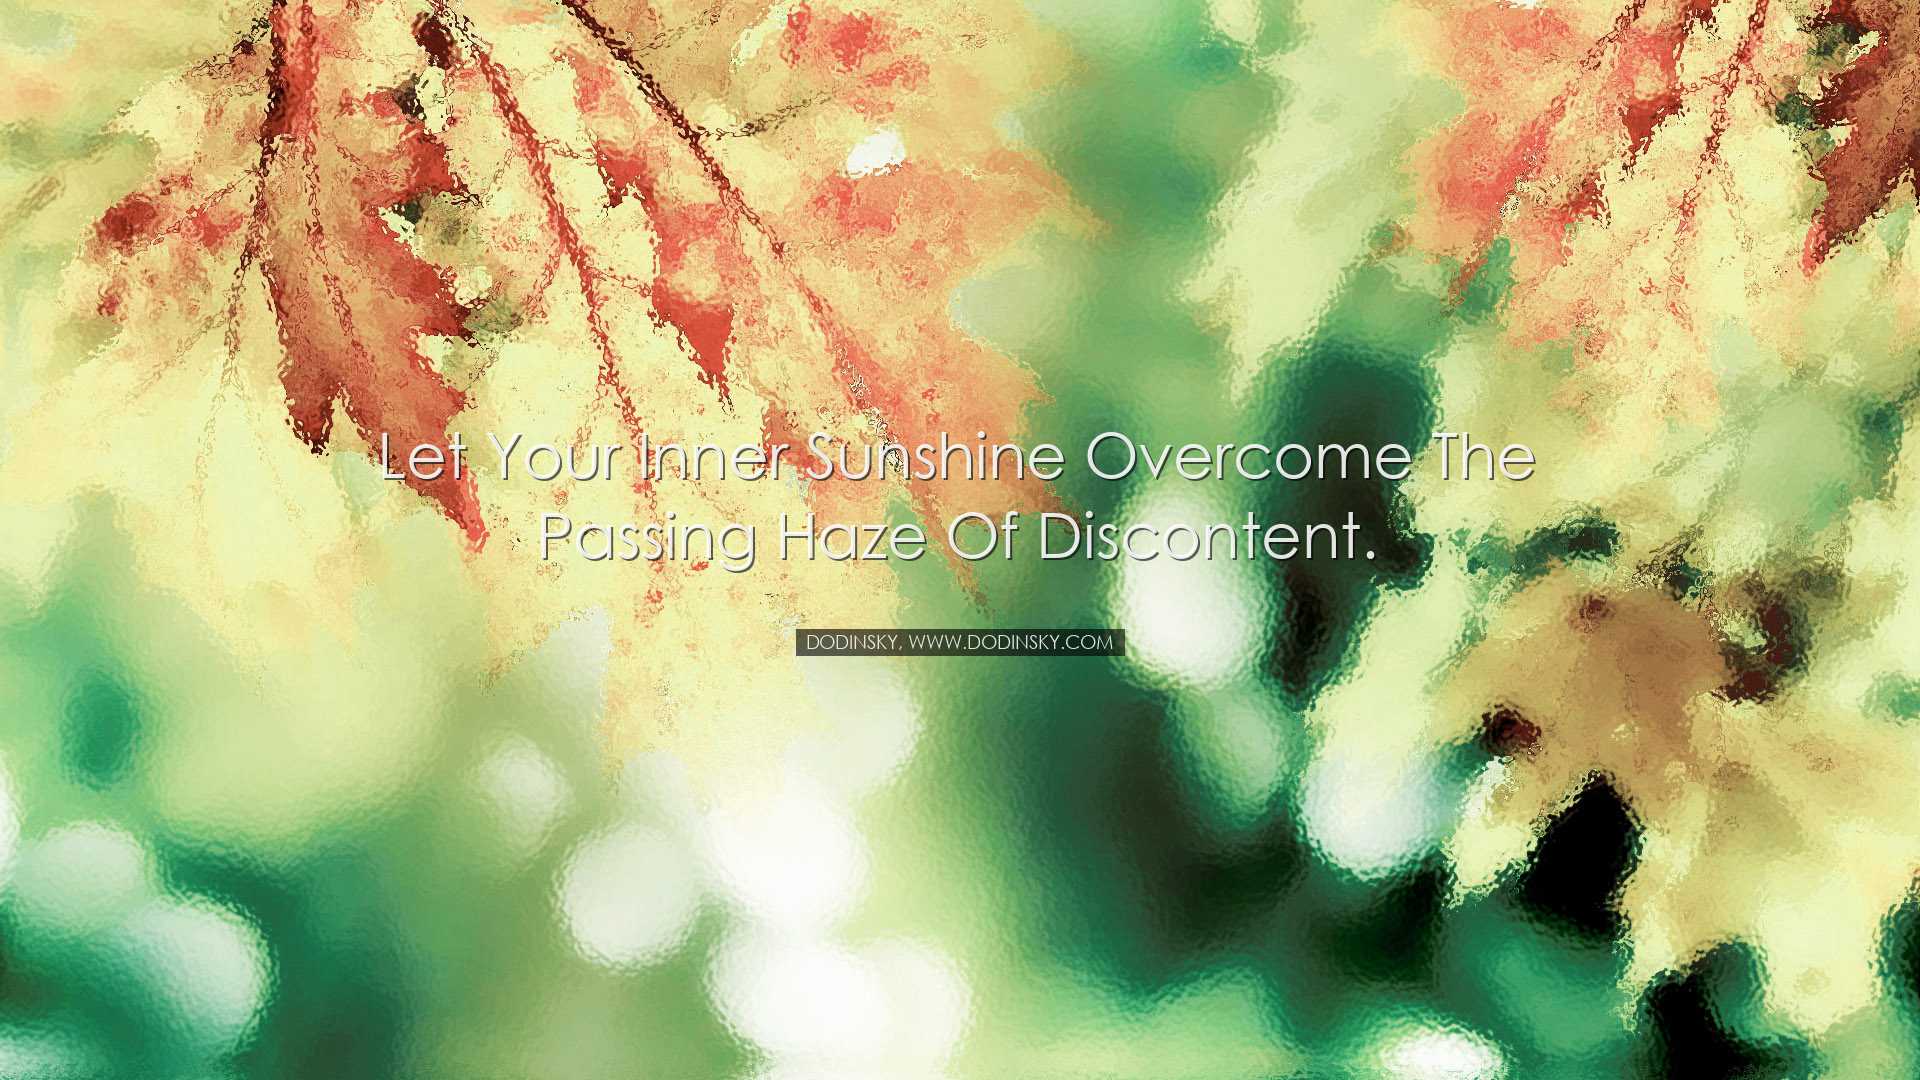 Let your inner sunshine overcome the passing haze of discontent. -